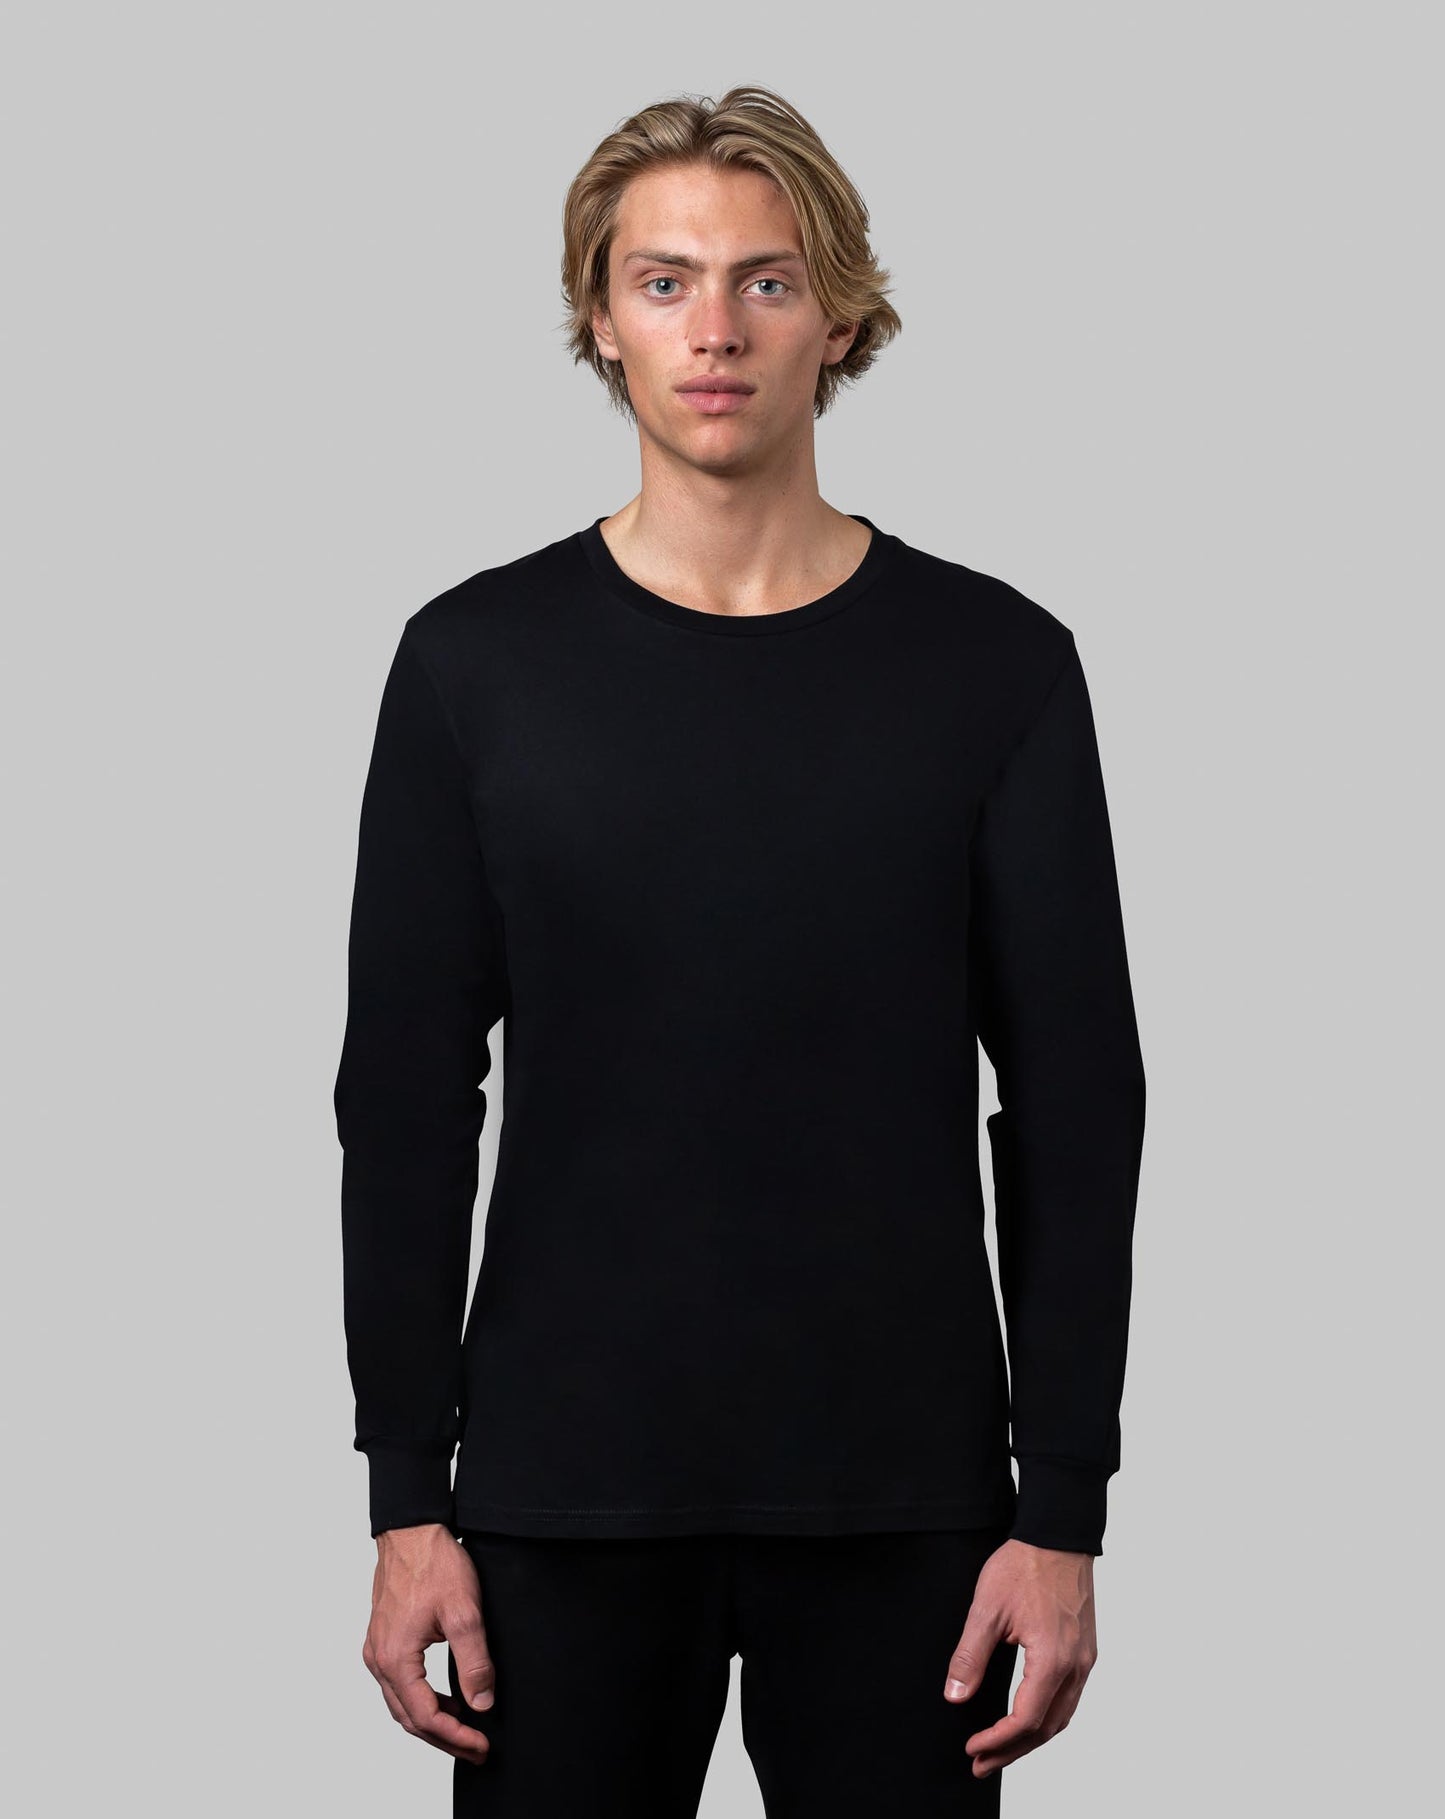 Unisex Adult Long Sleeve Tee With Cuffs | 4 Colours